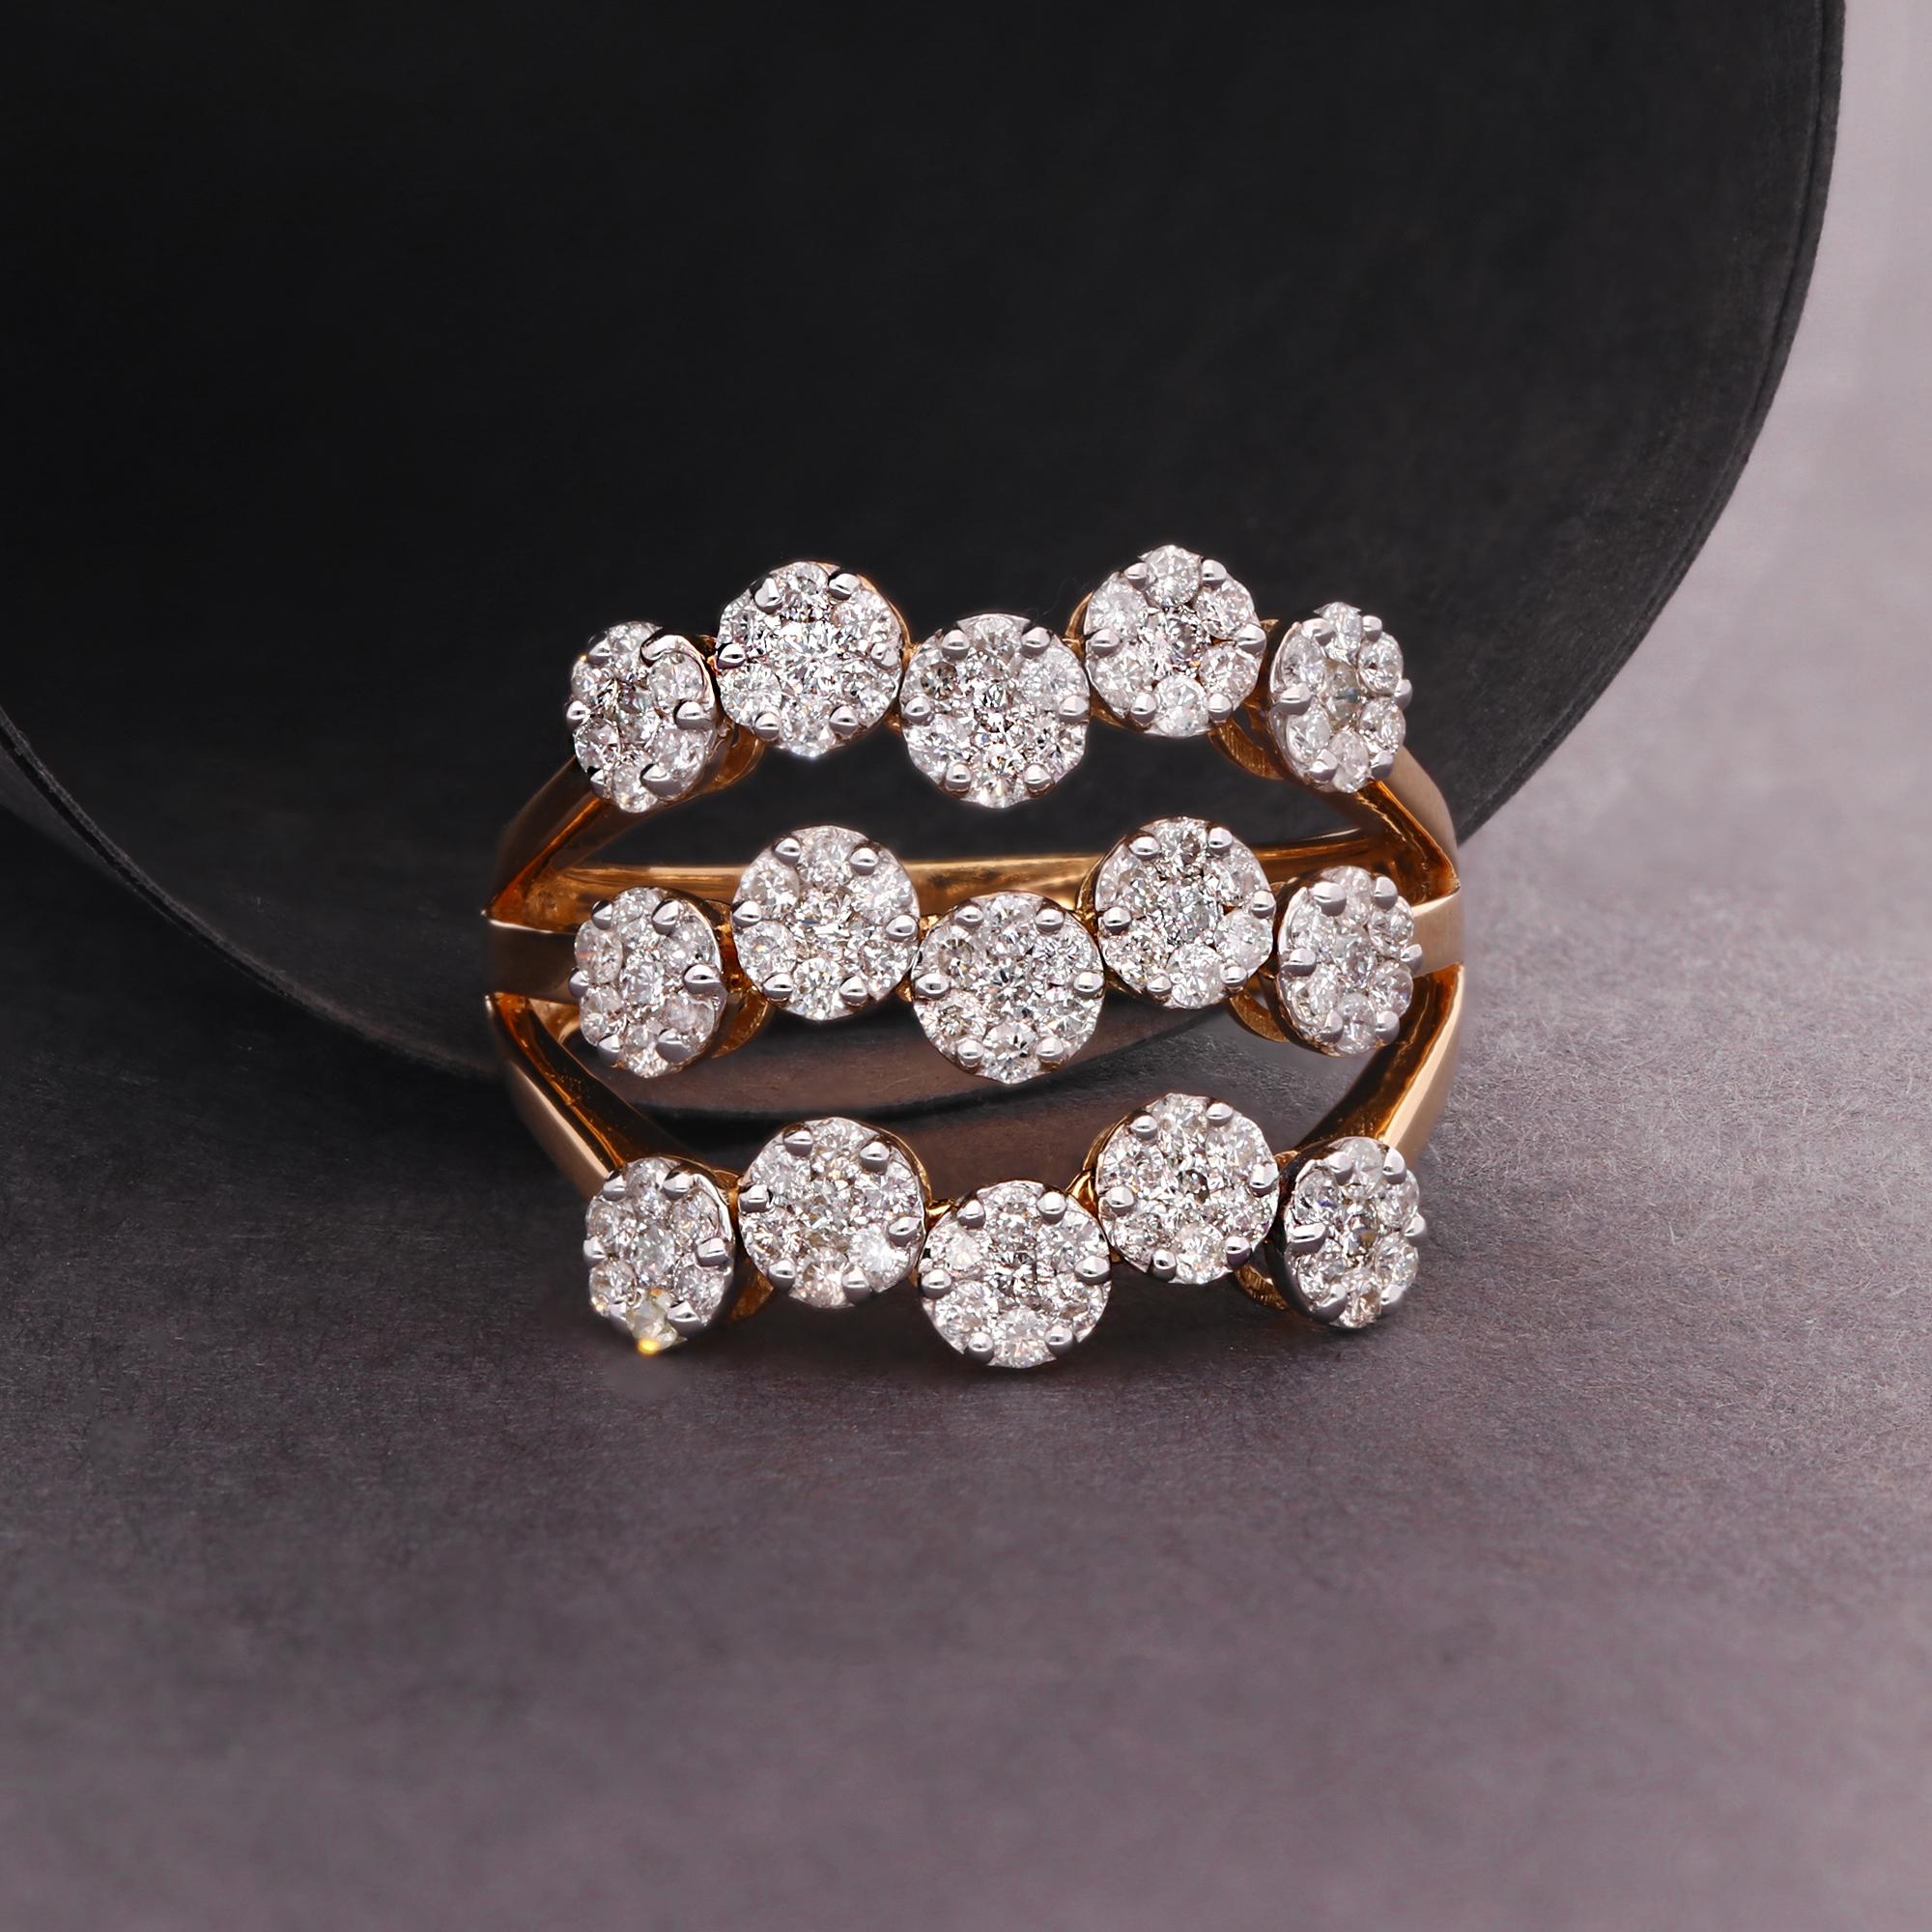 For Sale:  1.05 Carat SI Clarity HI Color Round Diamond Ring 18 Karat Yellow Gold Jewelry 4